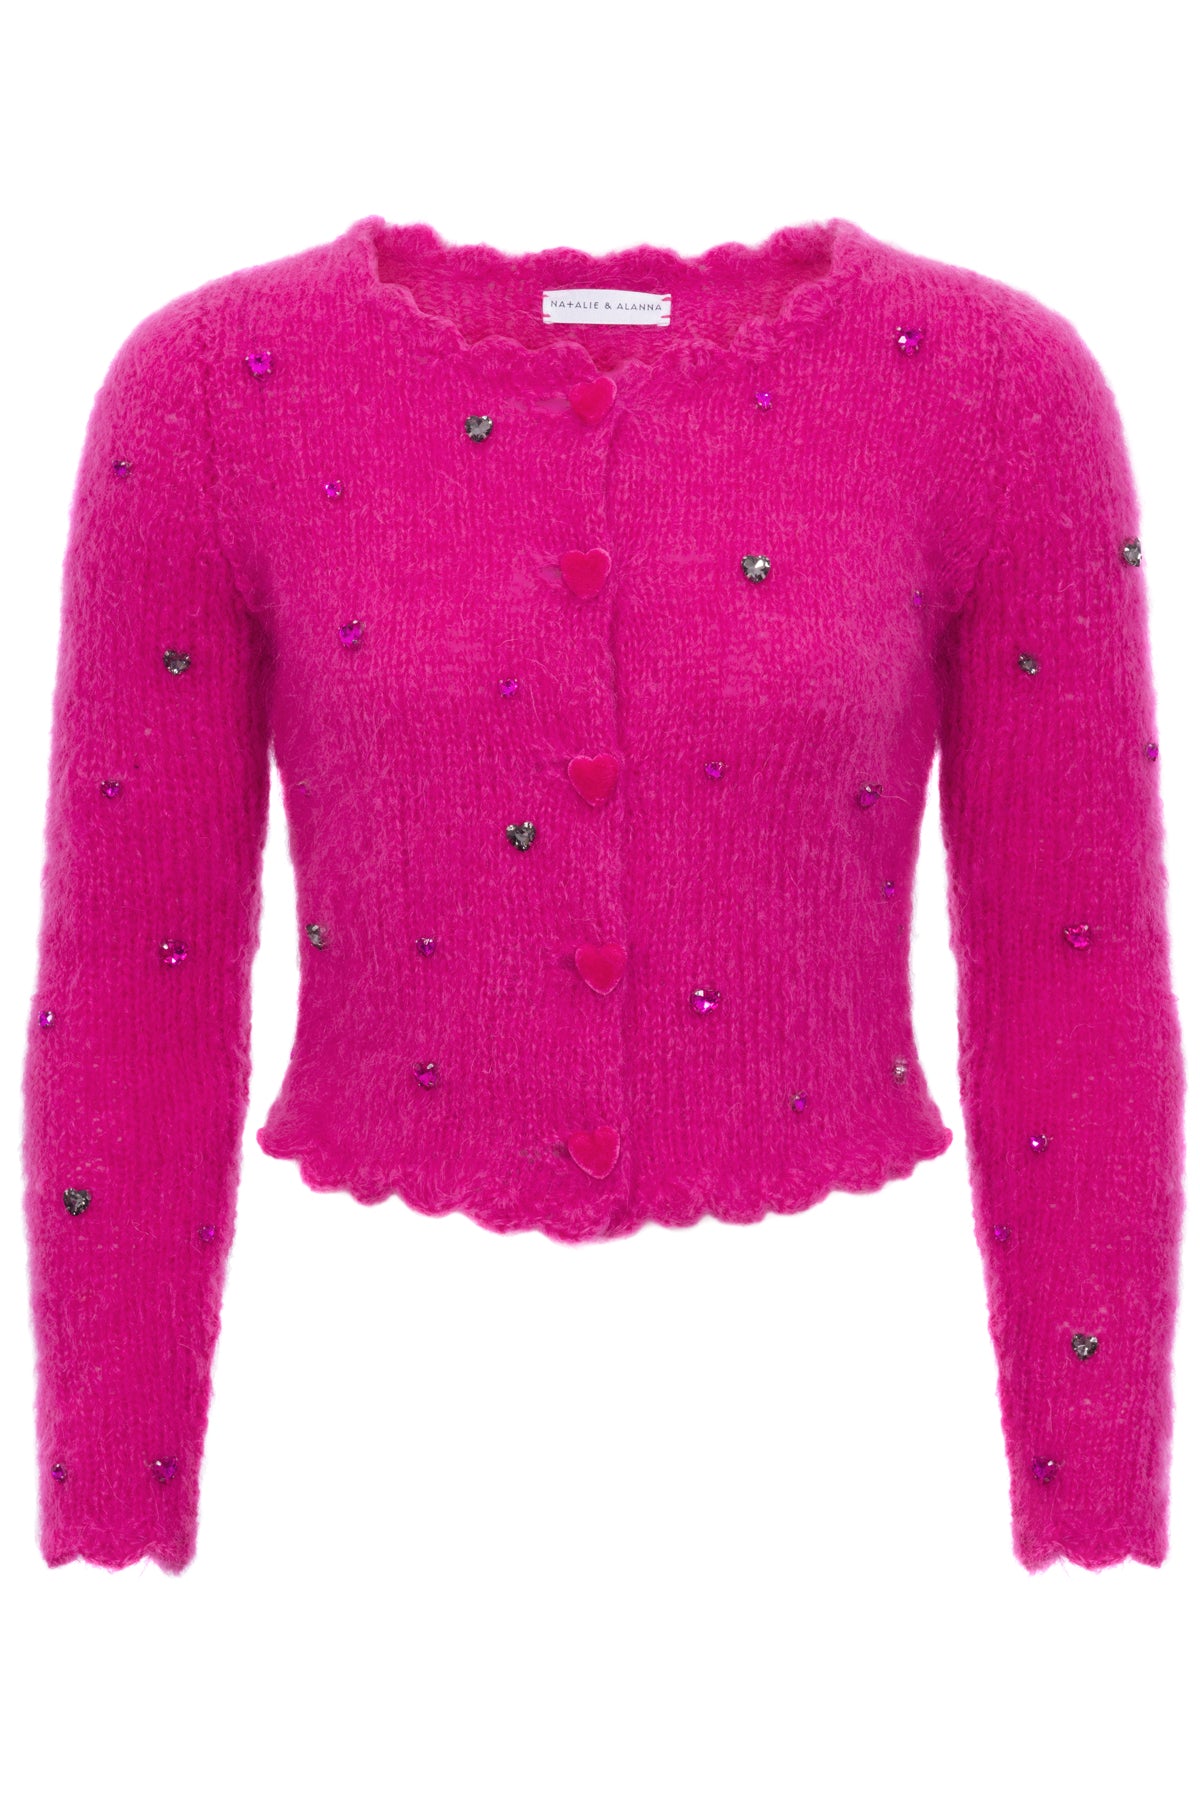 Paris Pink Mohair Hand-Knit Cardigan with Heart Embellishments- Made to Order